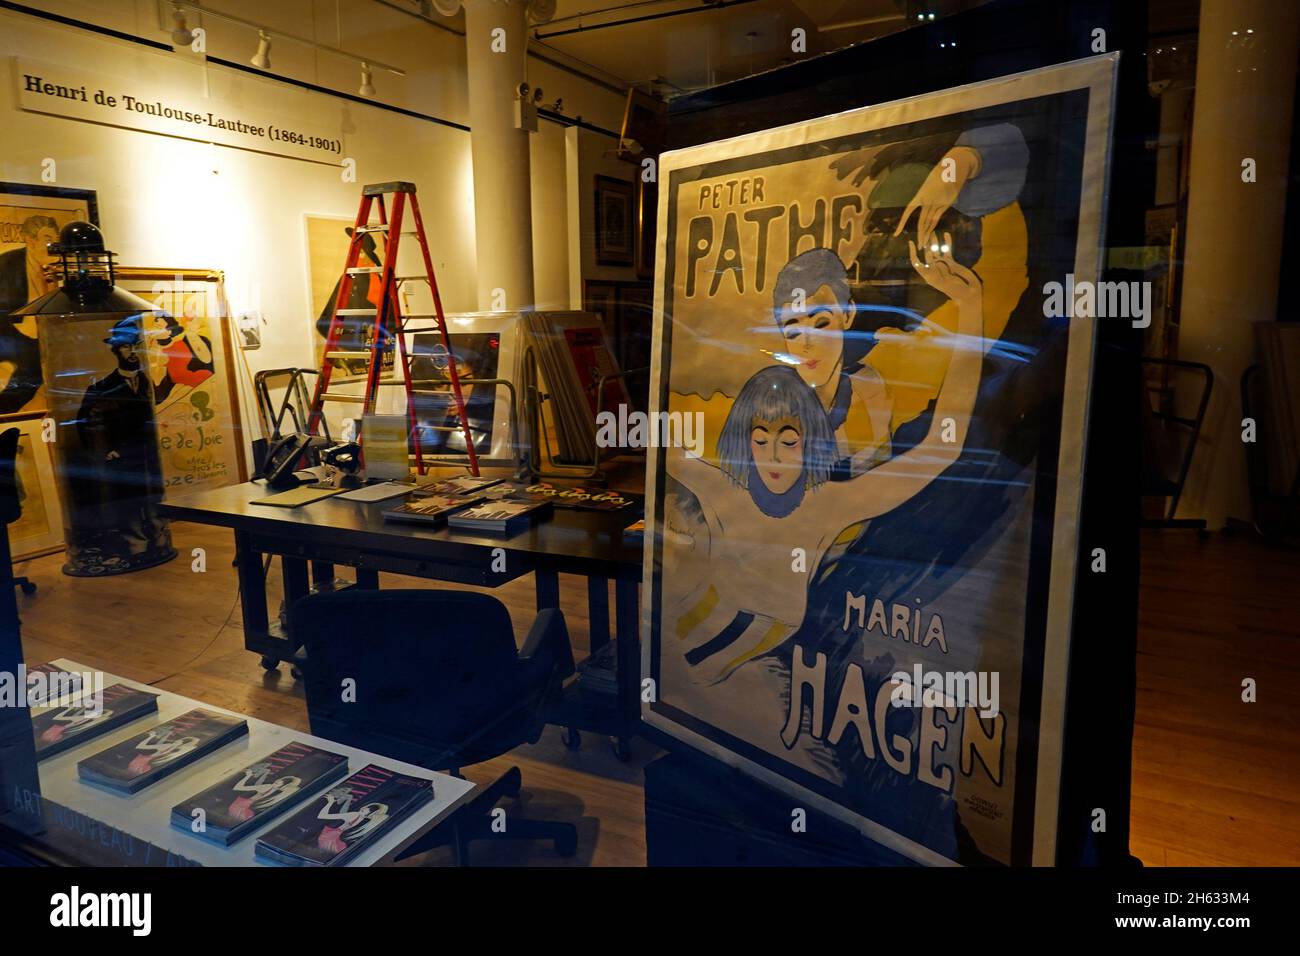 Toulouse-Lautrec poster in Chelsea NYC art gallery window Manhattan Stock Photo